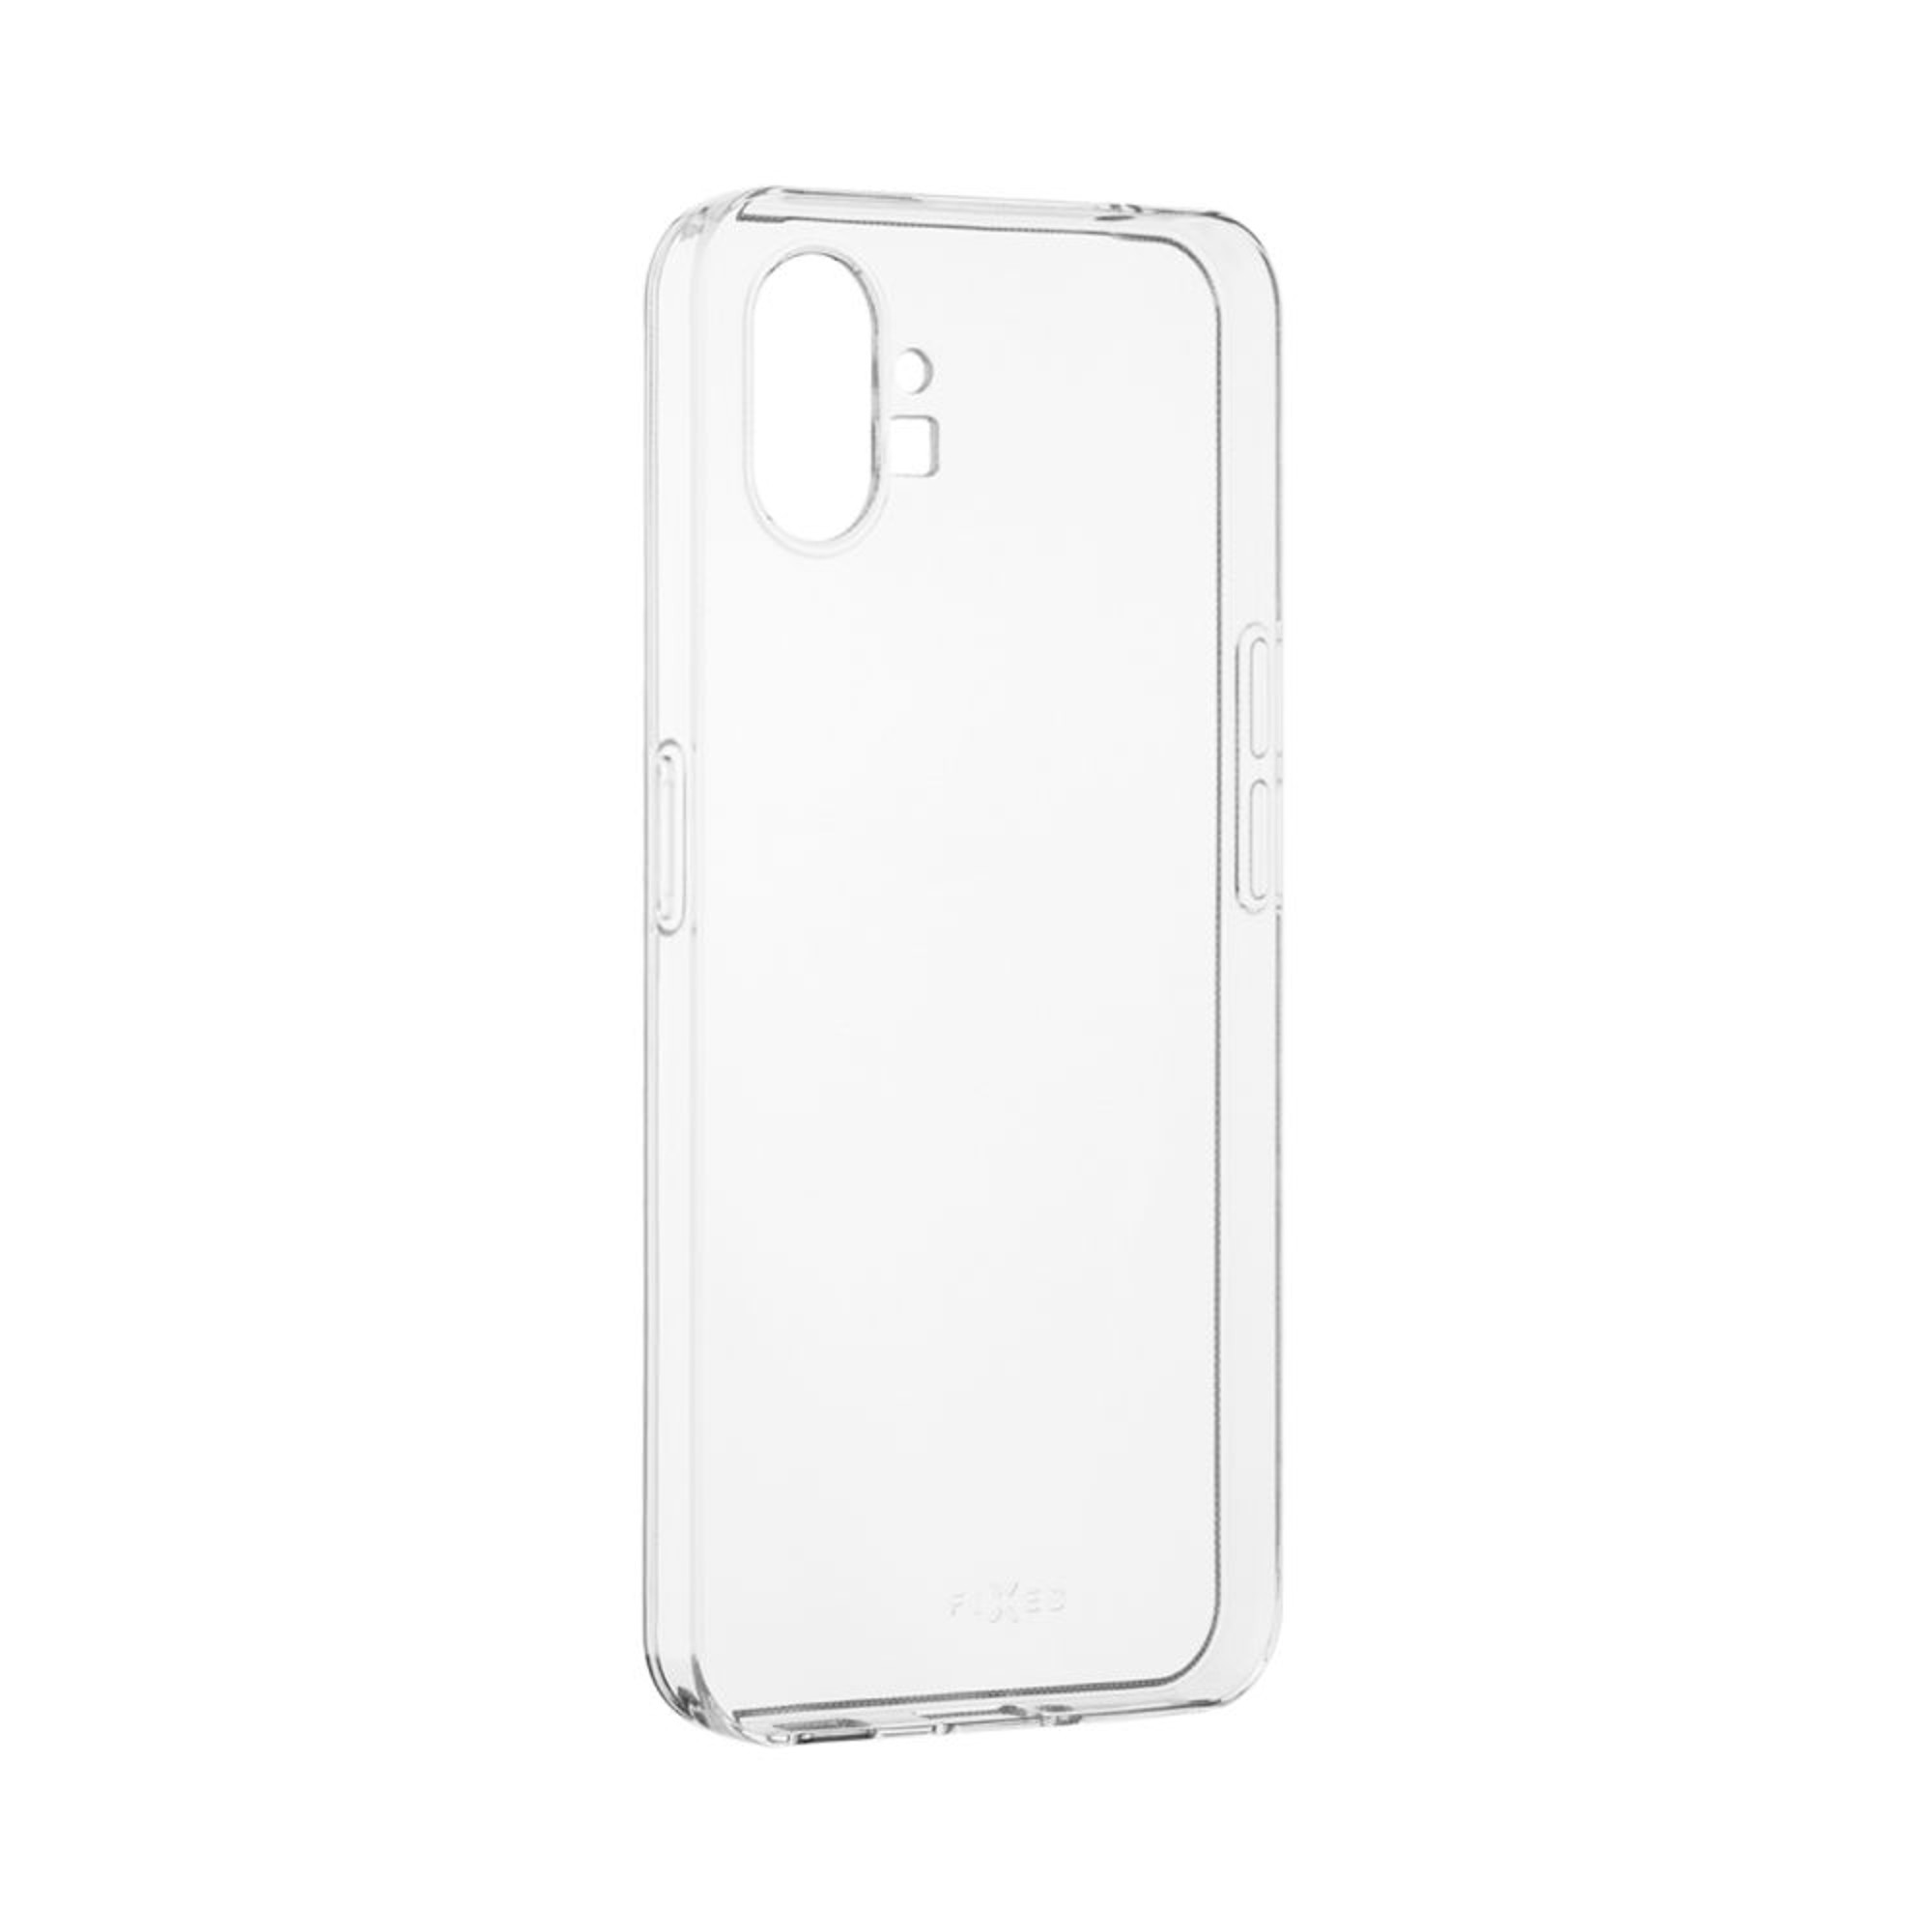 Nothing, (1), Backcover, phone FIXED FIXTCC-1005, Transparente